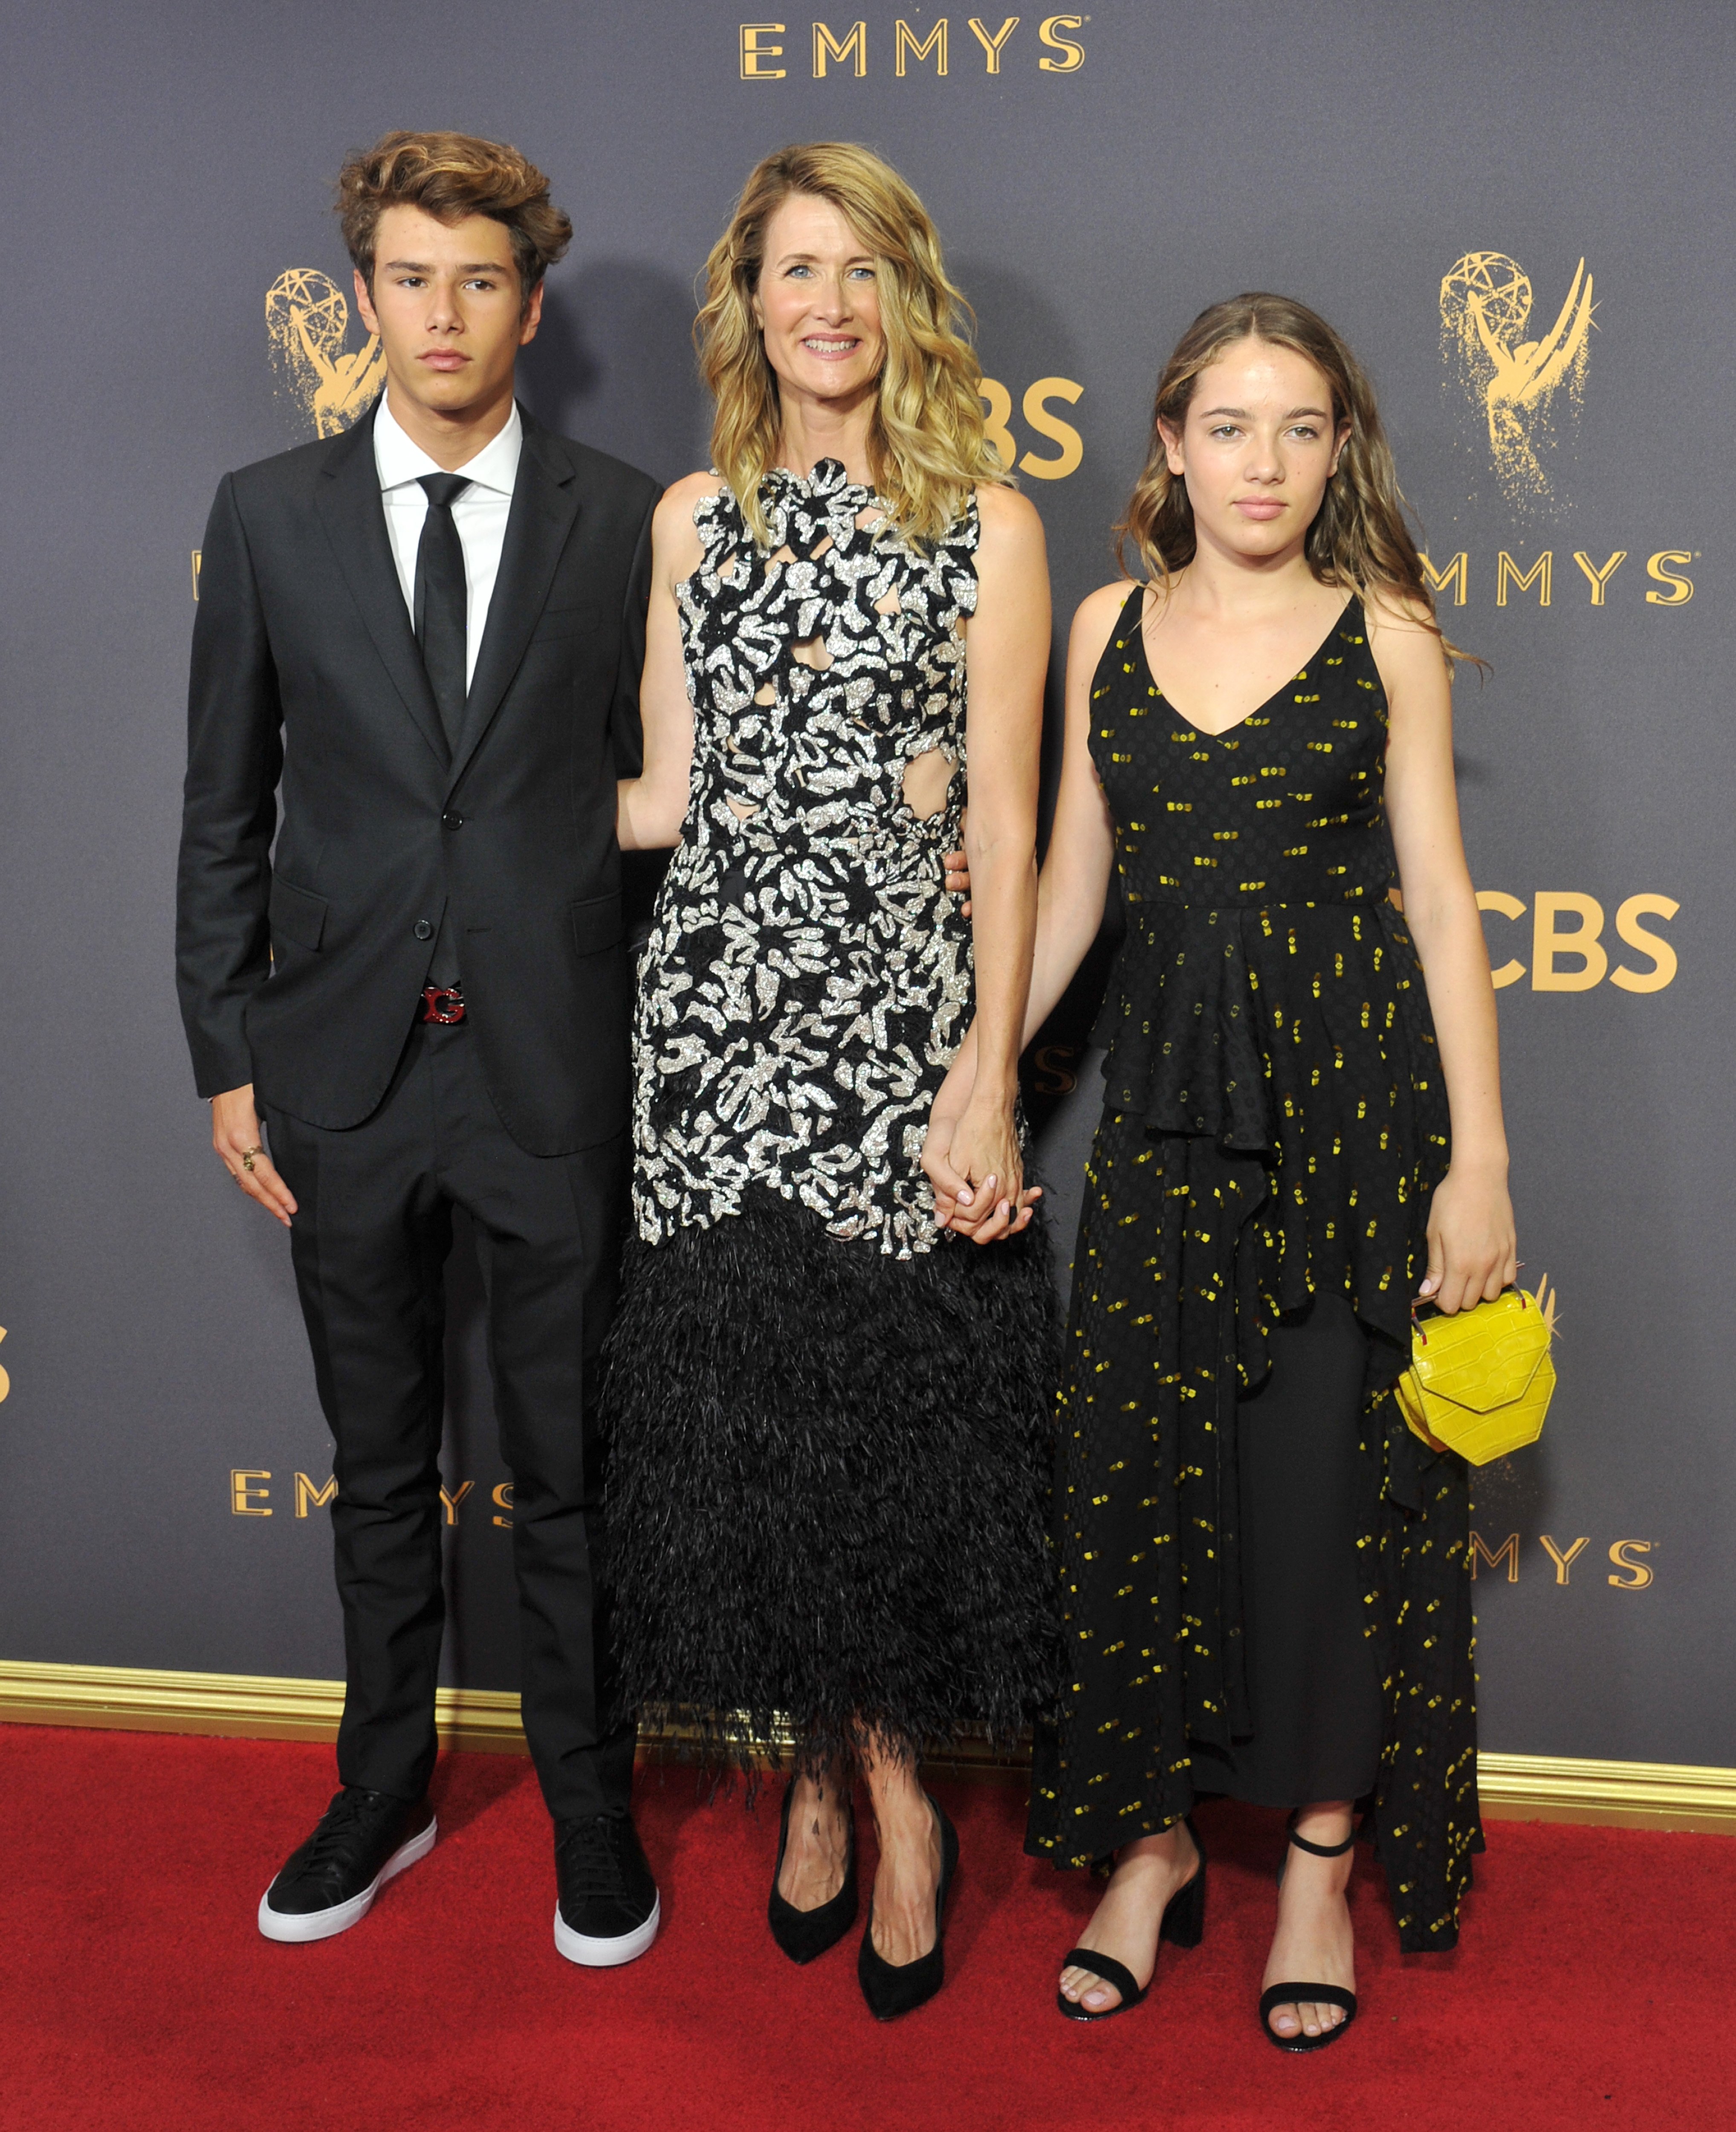 Laura Dern, son Ellery Walker Harper and daughter Jaya Harper arrive at the 69th Annual Primetime Emmy Awards at Microsoft Theater on September 17, 2017 in Los Angeles, California | Source: Getty Images